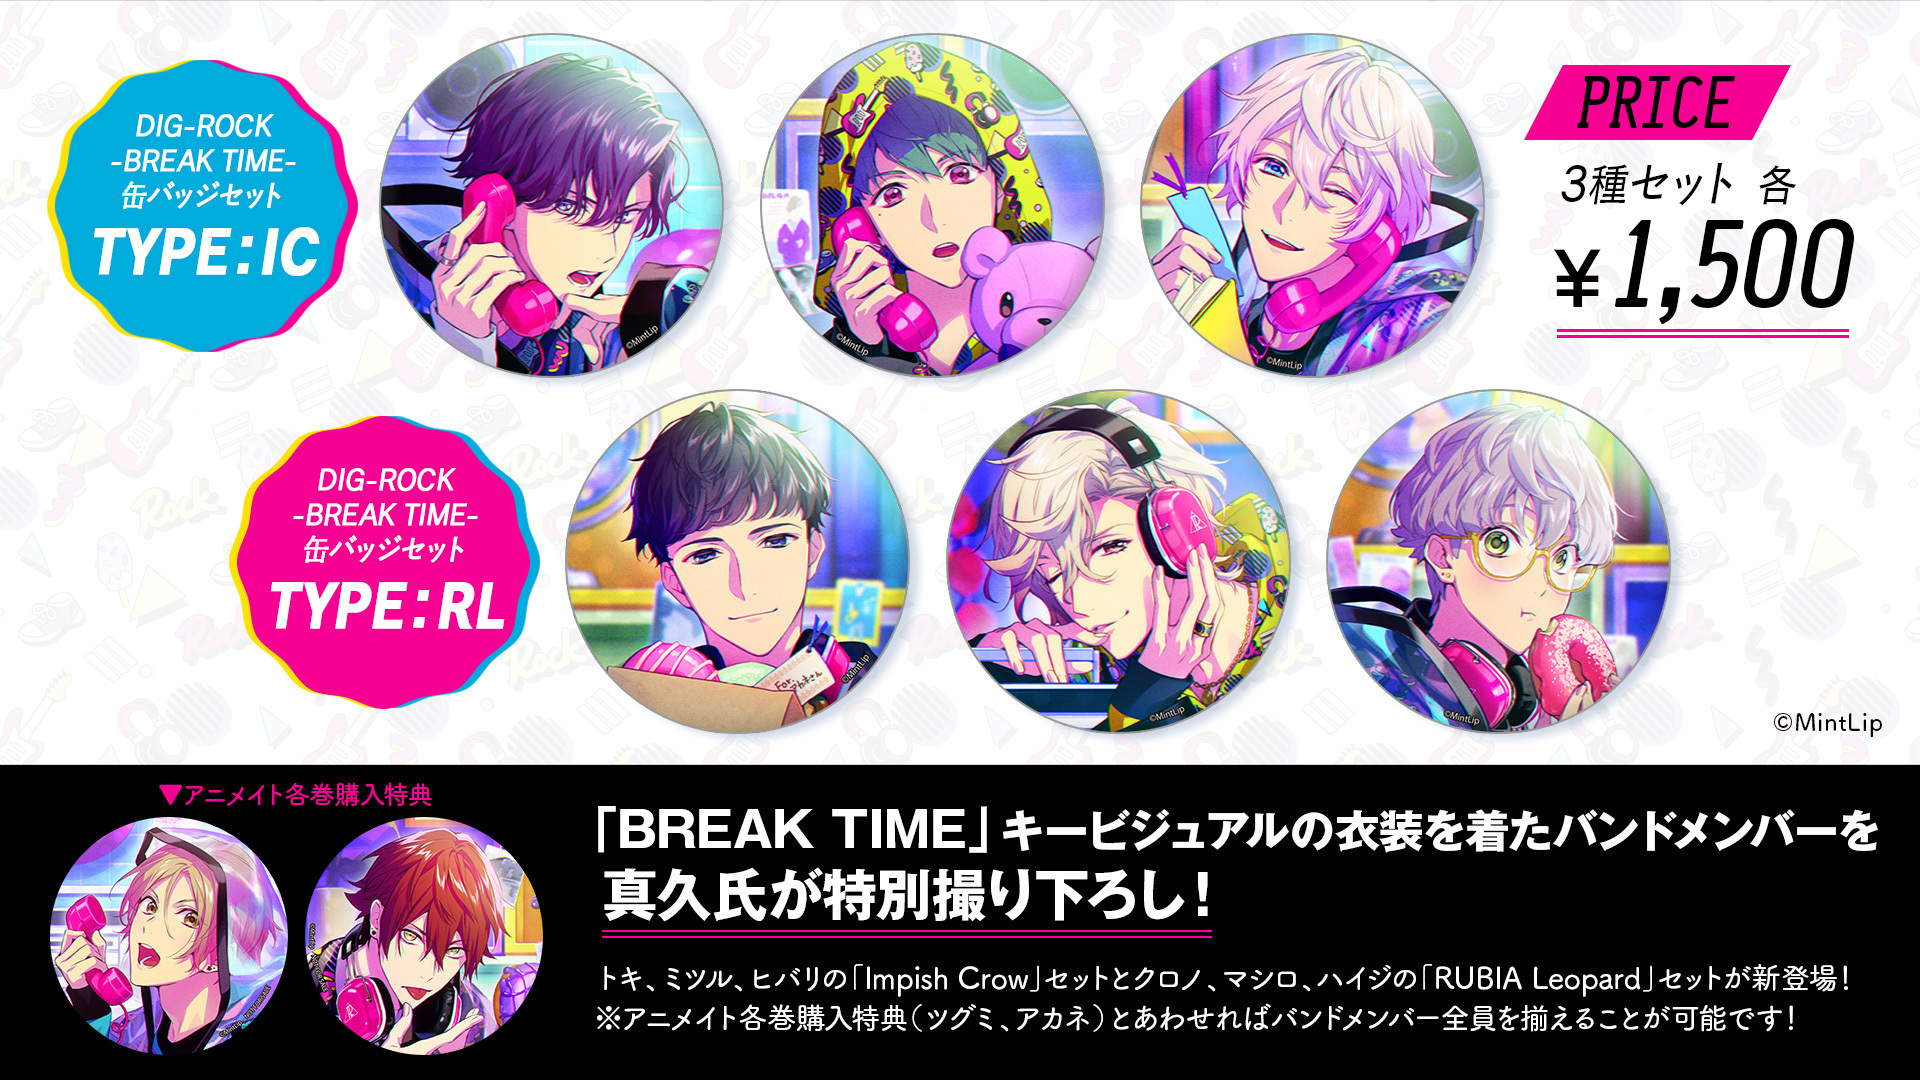 DIG-ROCK BREAK TIME 缶バッジセット Type：IC